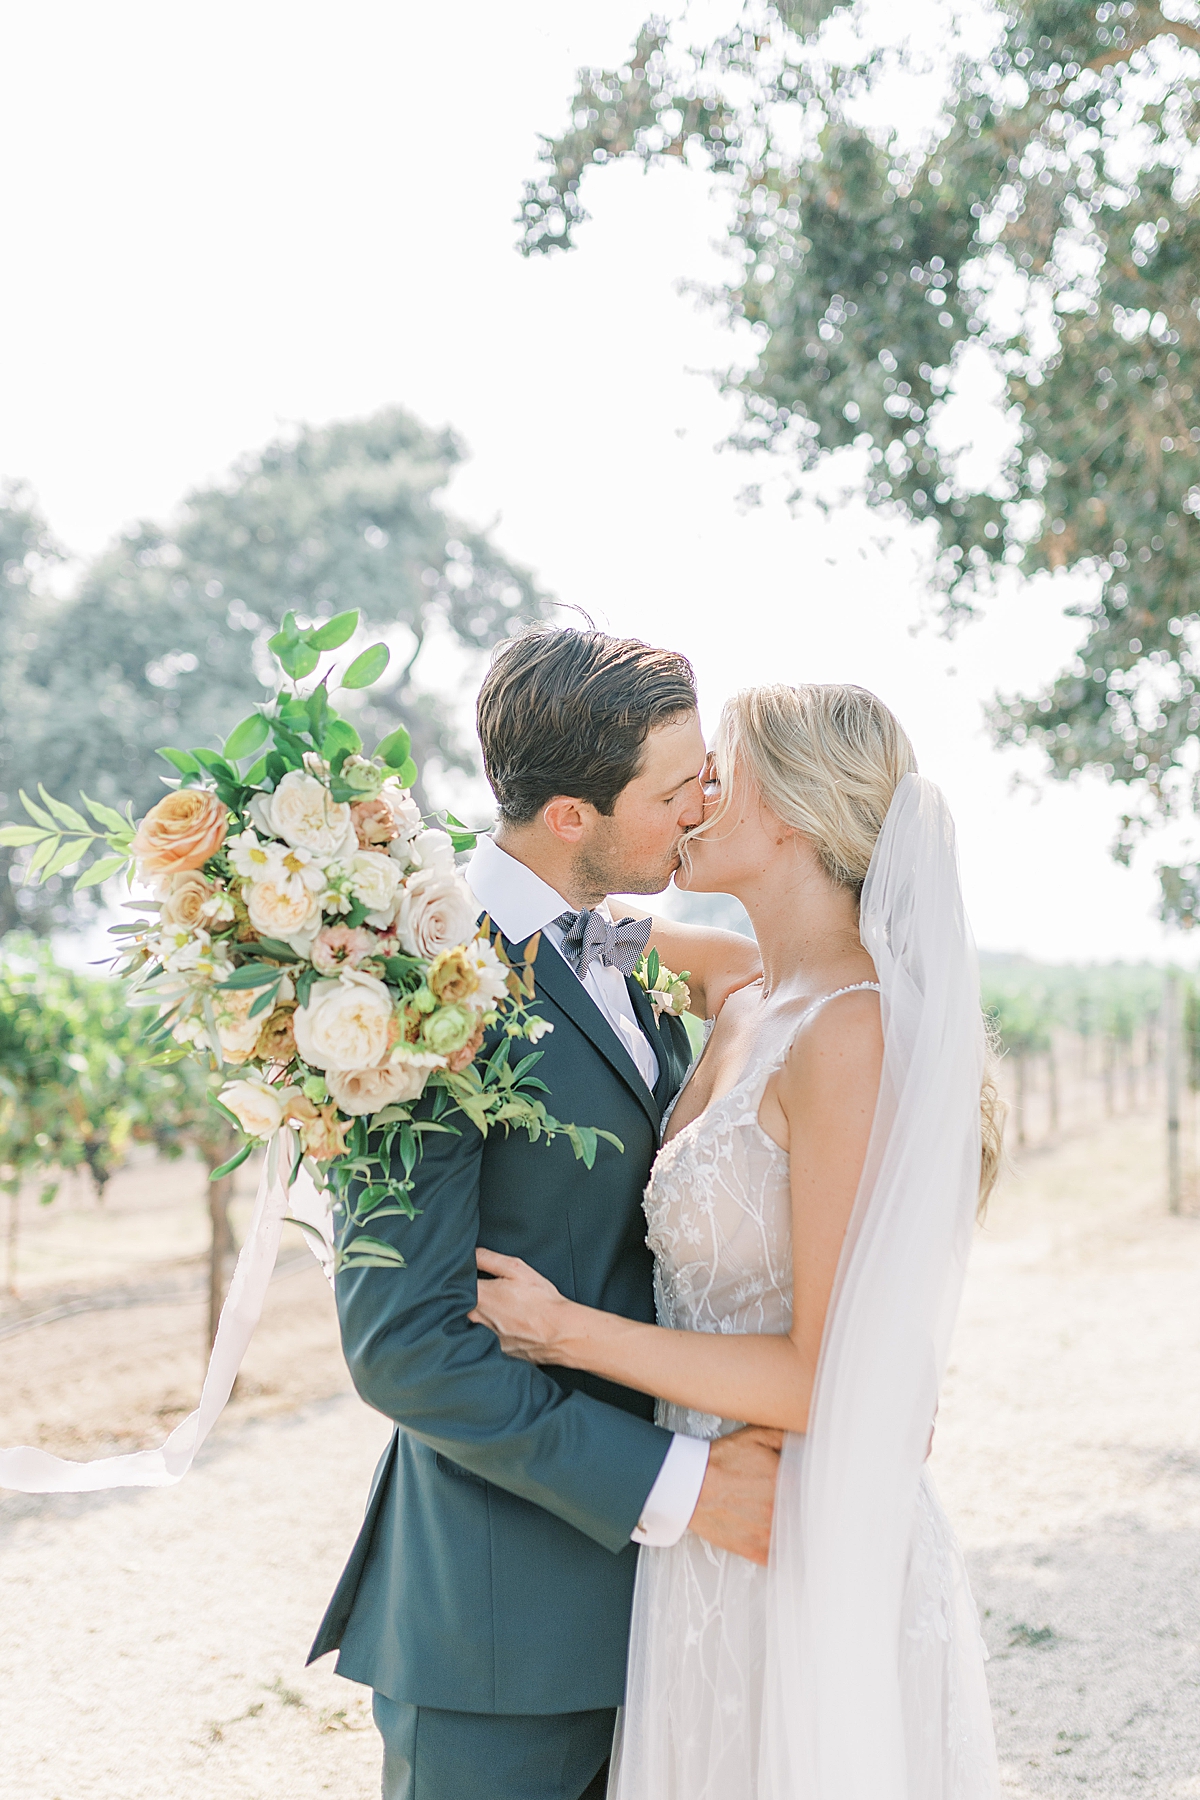 The couple sharing a kiss under the oaks and in front of a vineyard. 